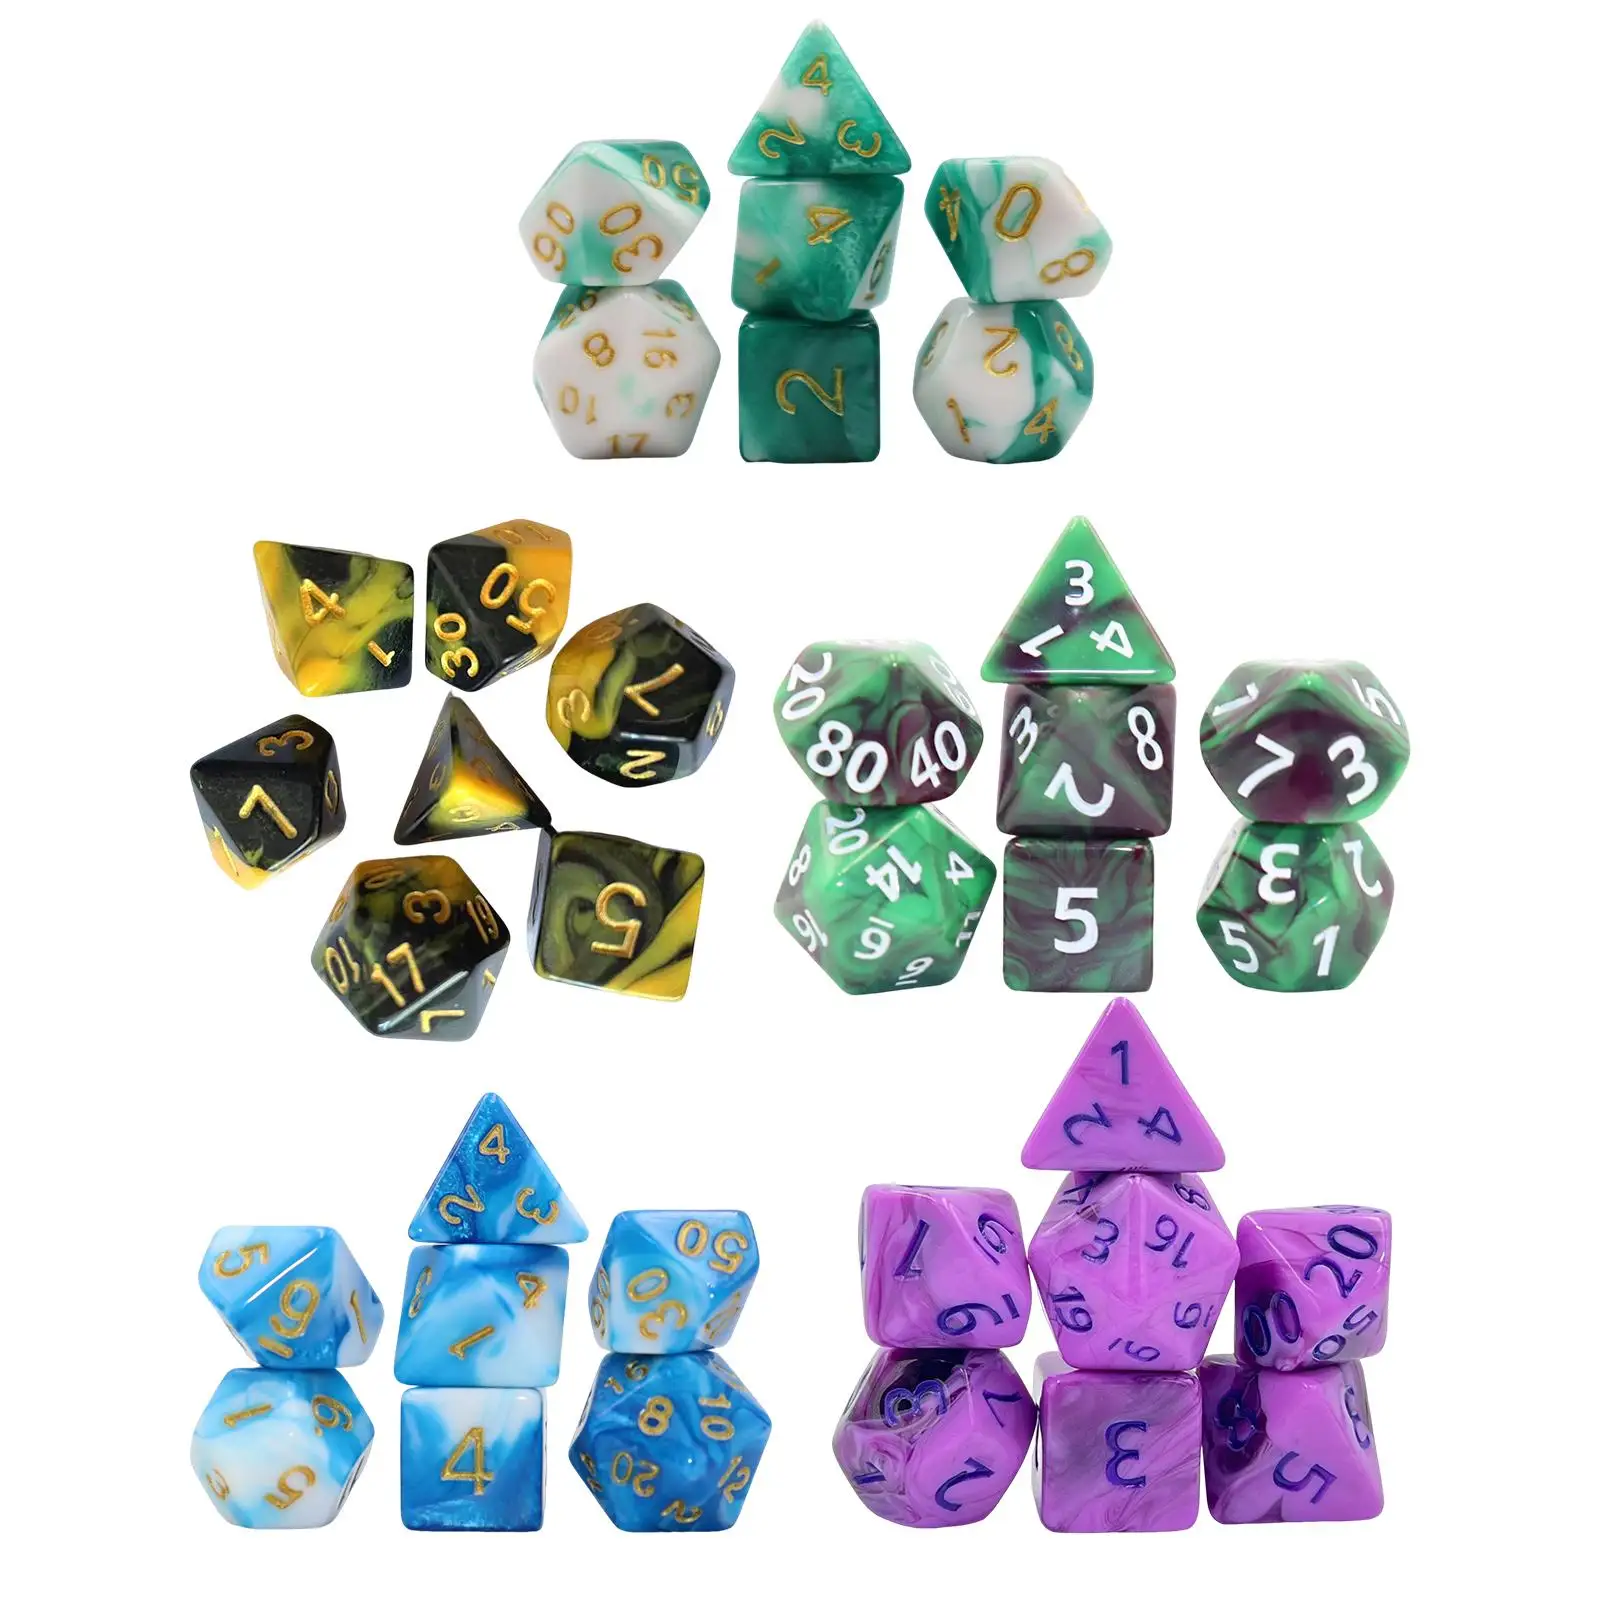 7 Pieces Polyhedral Dices Multisided Game Dices for Roll Playing Games